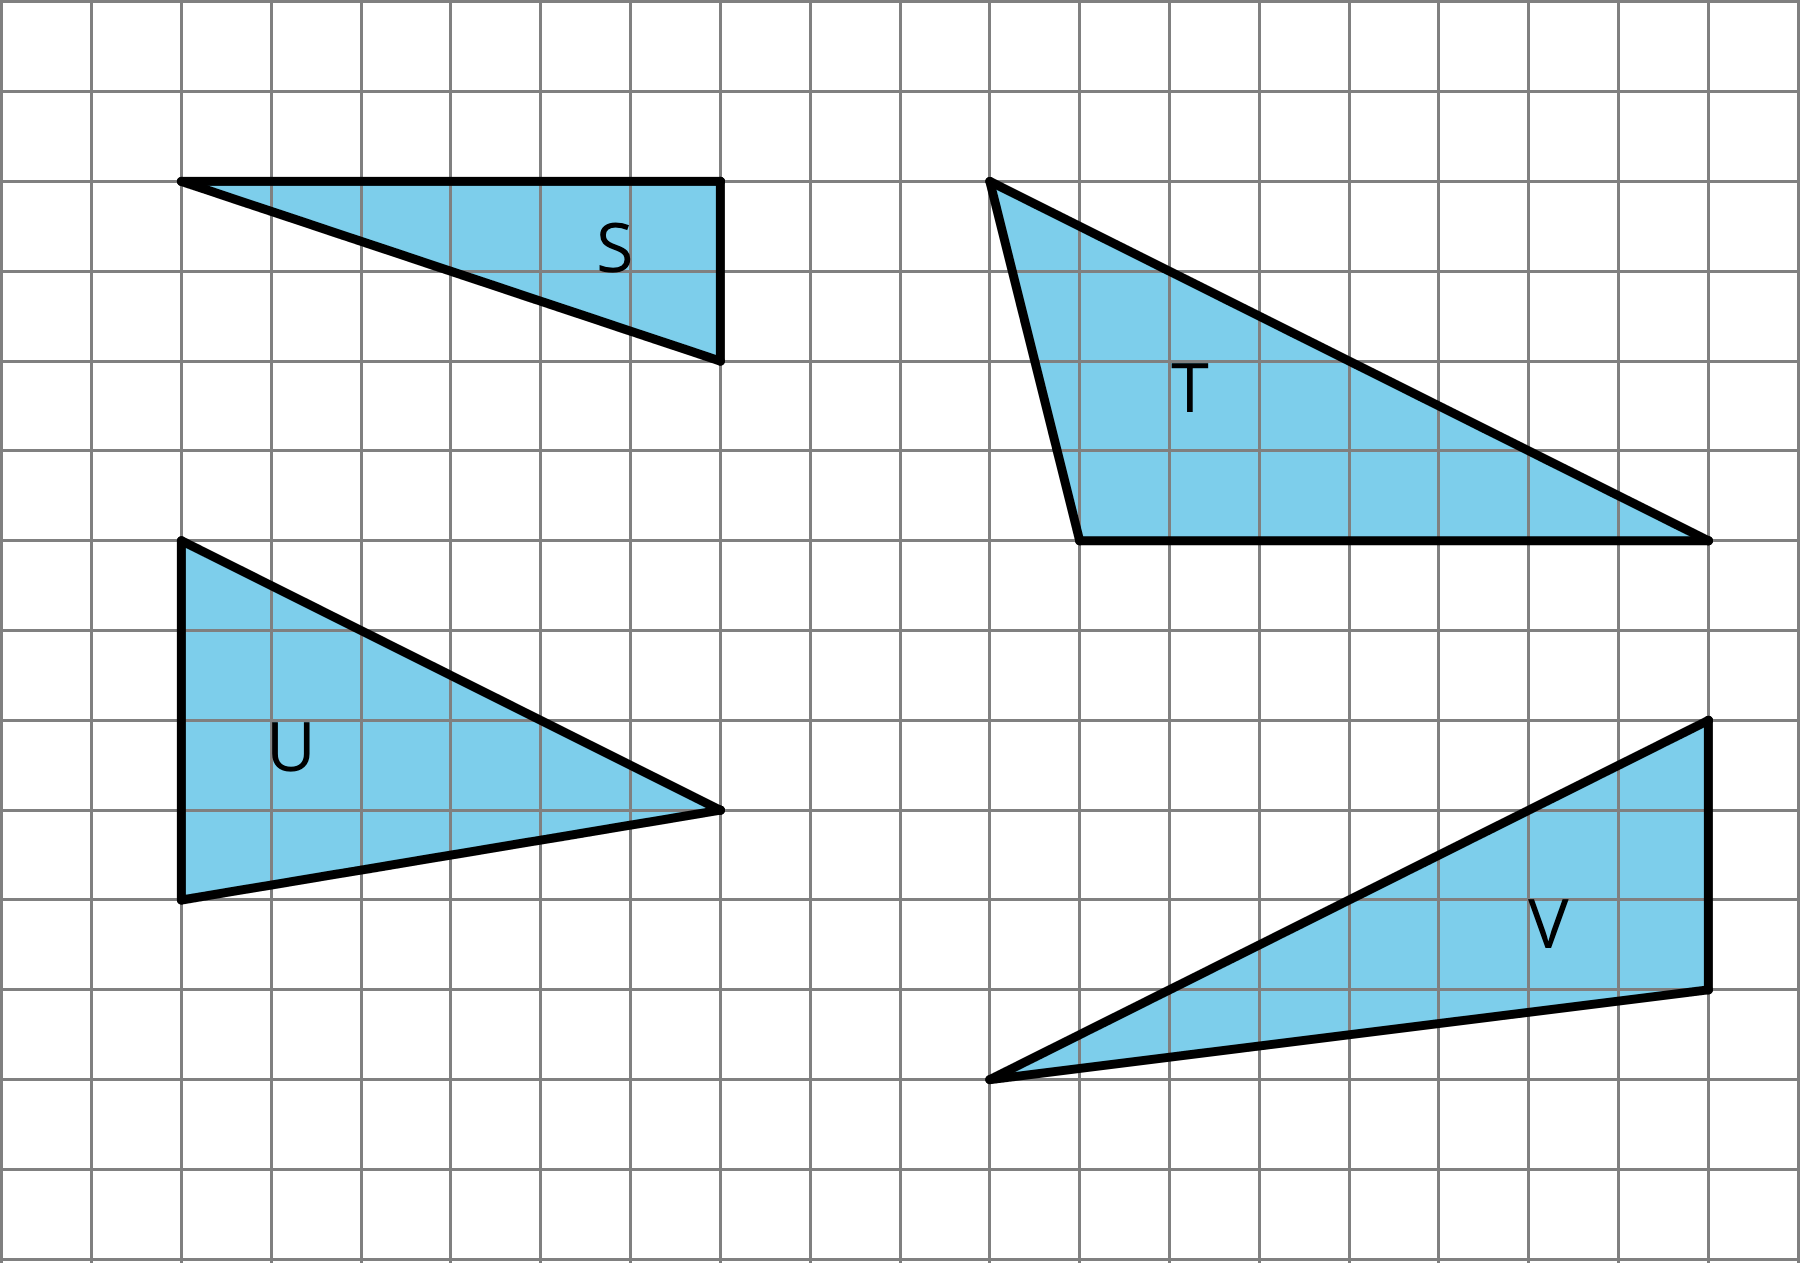 Four triangles on a grid, labeled S, T, U, and V.